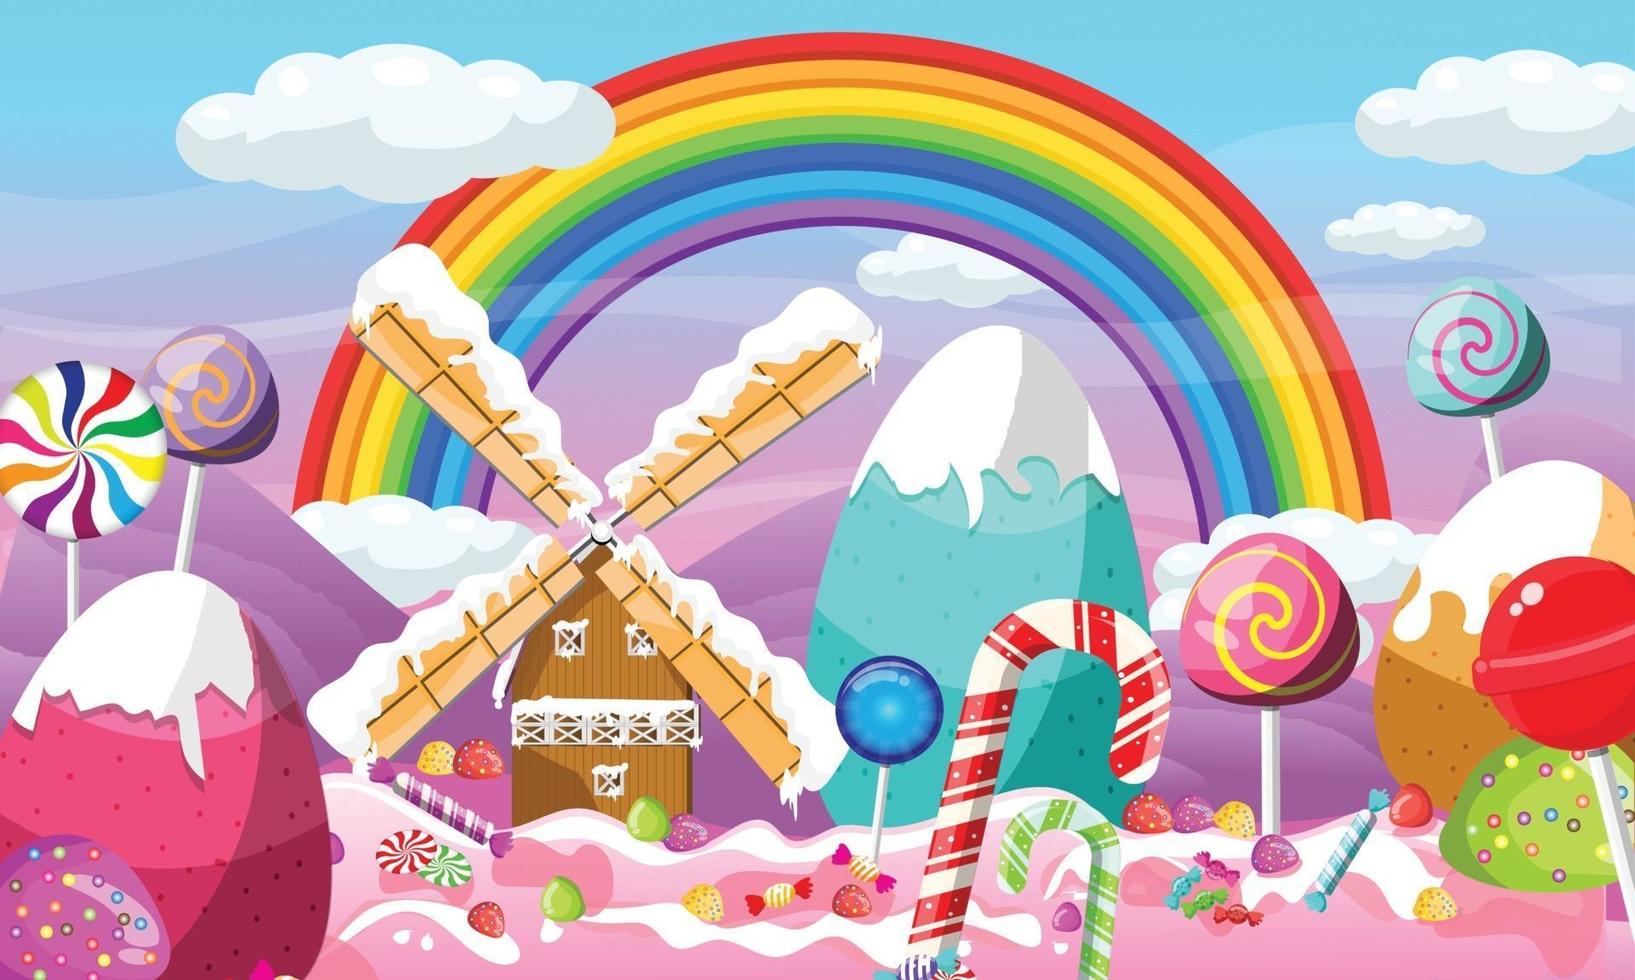 Christmas candy land landscape design with rainbow vector